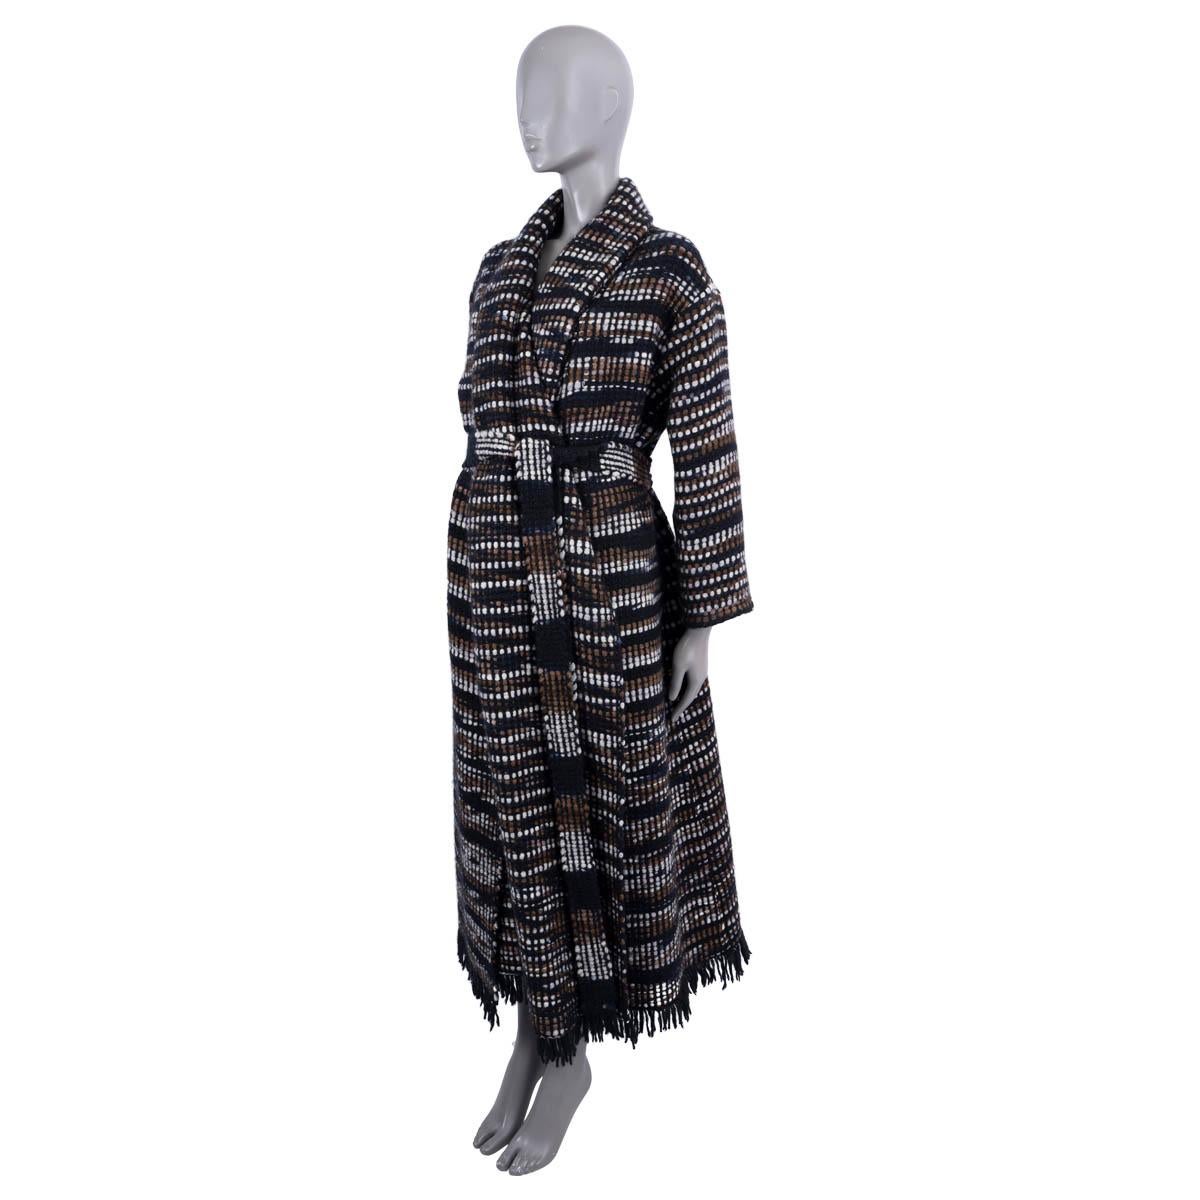 100% authentic Gabriela Hearst Larkin knit coat in black, brown and white cashmere (100%). Features fringed seam and two side pockets and matching belt. Unlined. Has been worn and is in excellent condition.

2022 Fall/Winter

Measurements
Tag